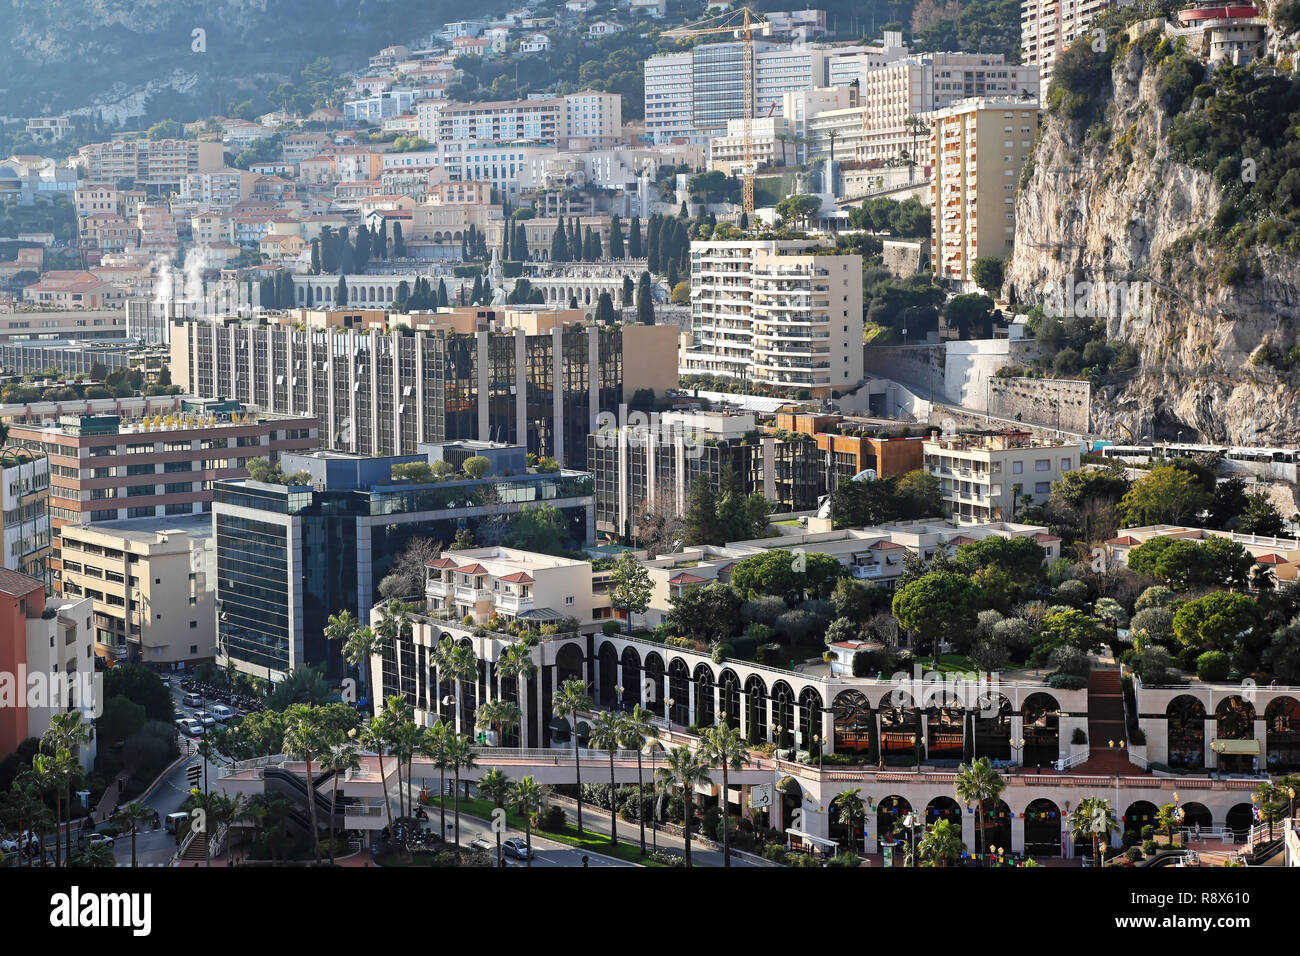 City Monte Carlo Monaco Editorial High Resolution Stock Photography and  Images - Alamy